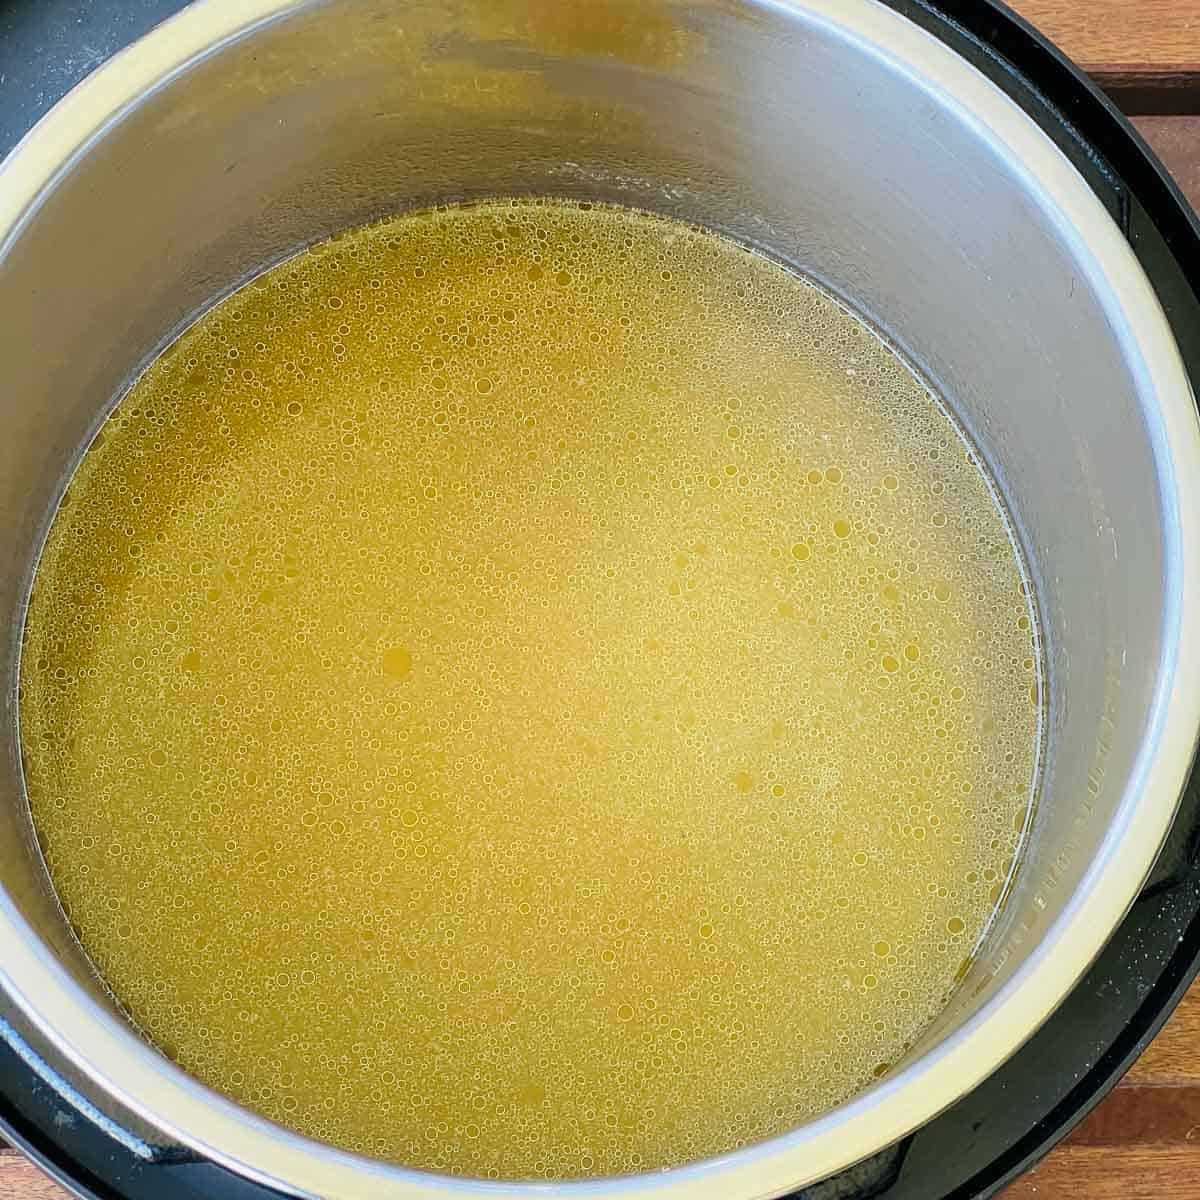 Strain the broth to remove whole spices and other ingredients.